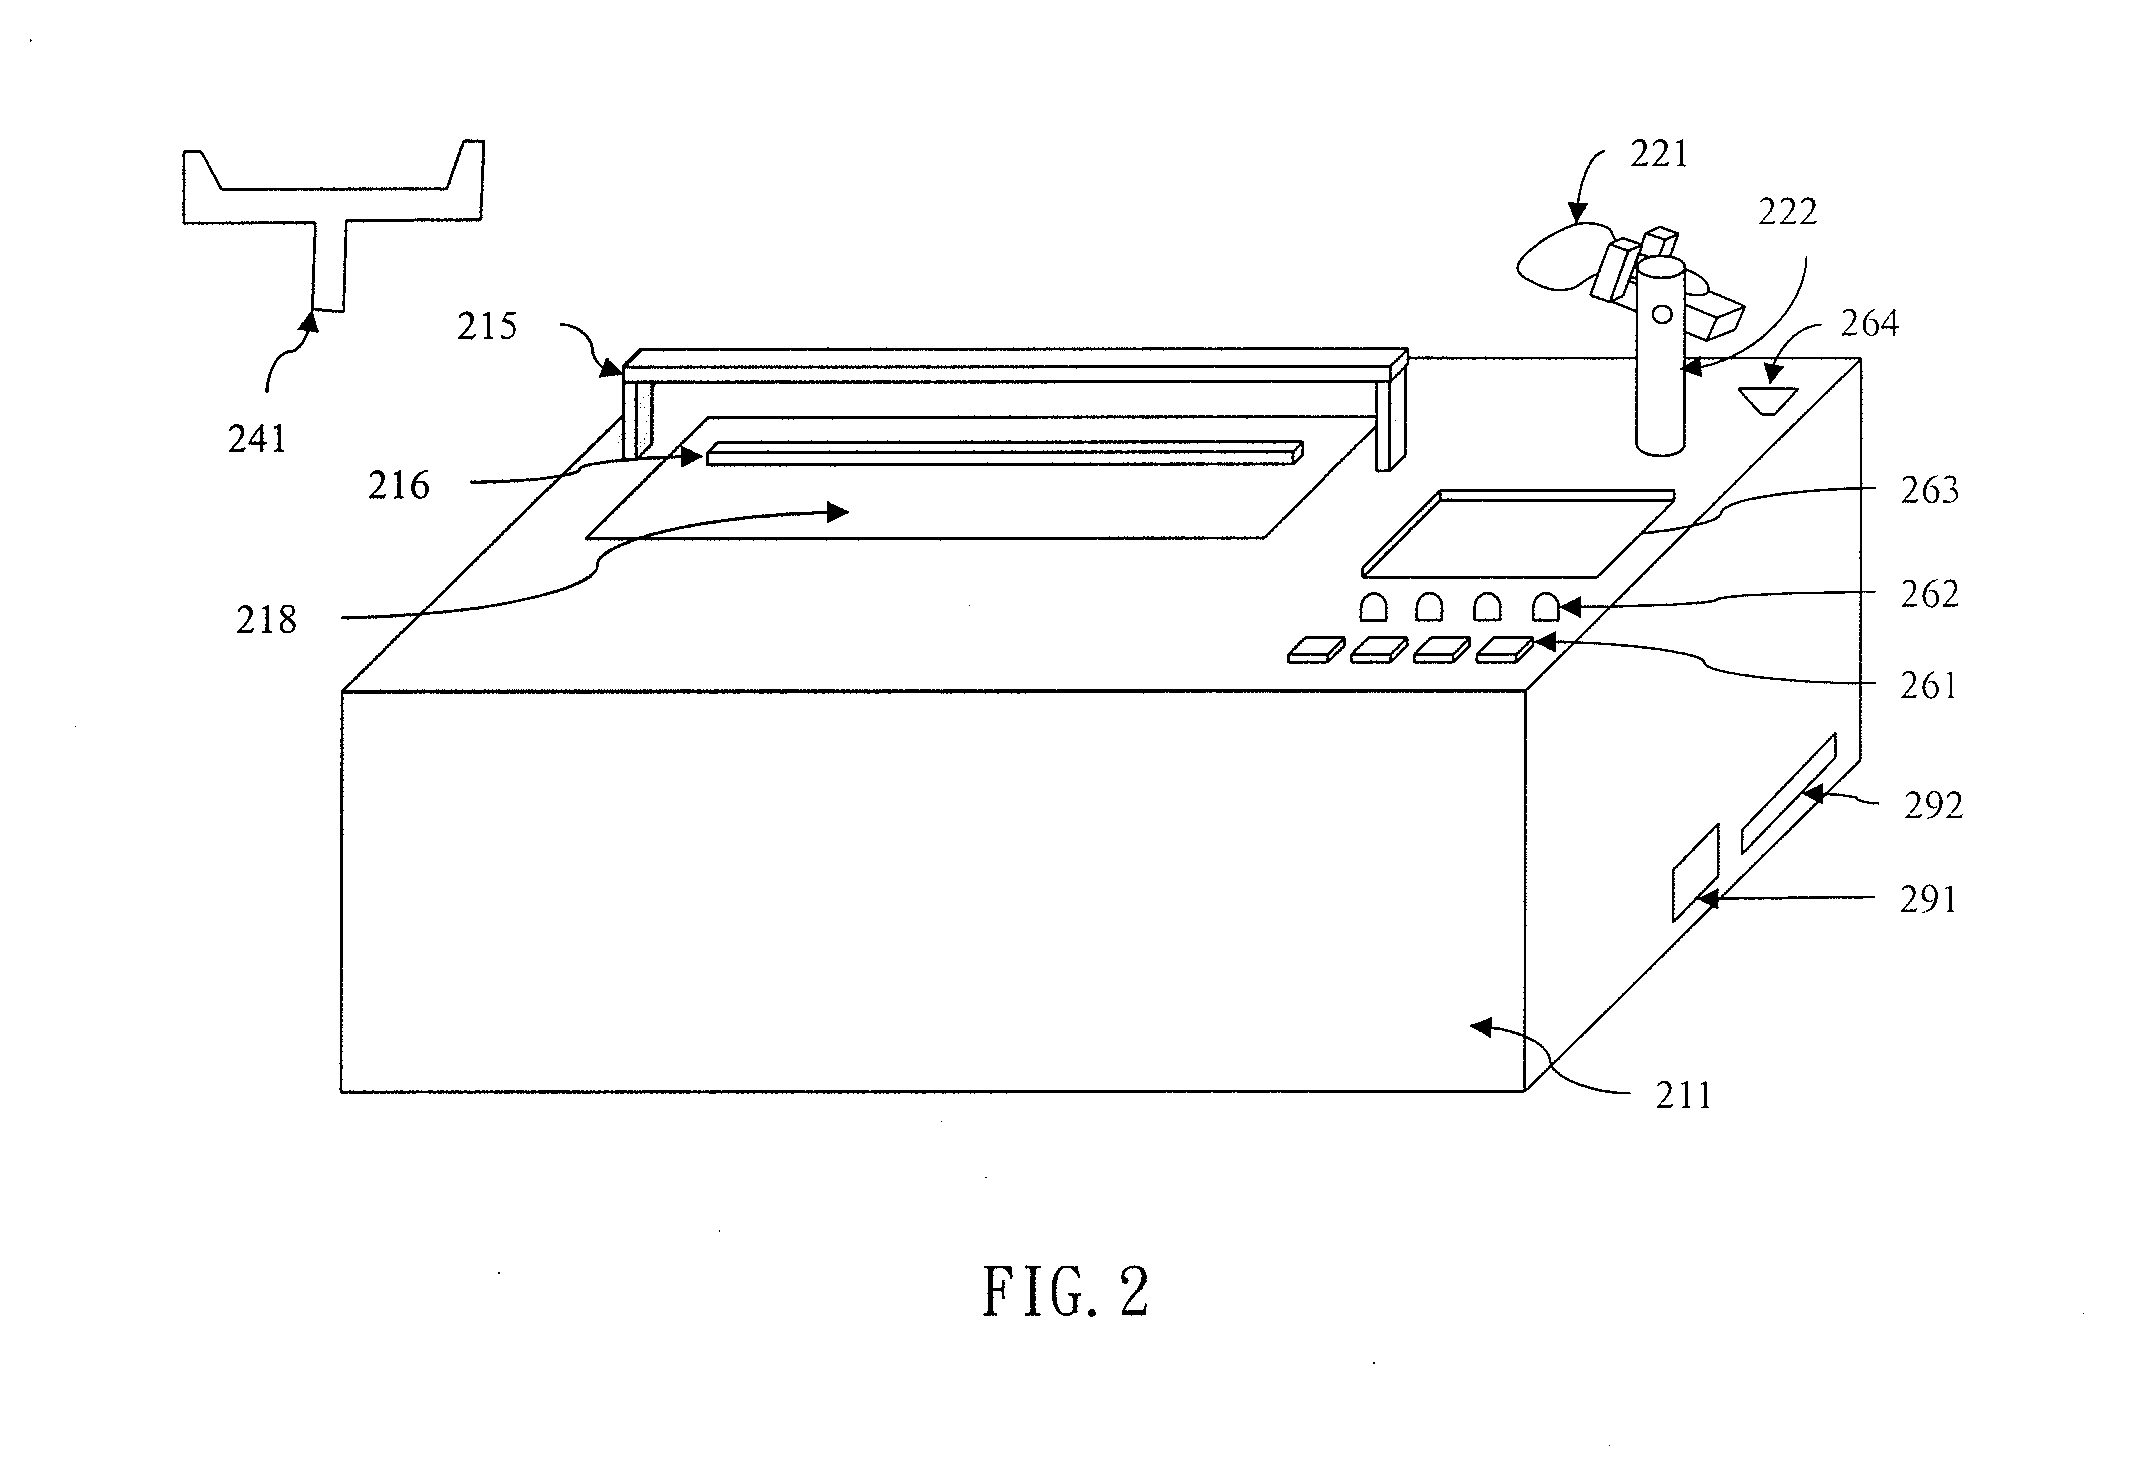 RFID-based book tagging device and method